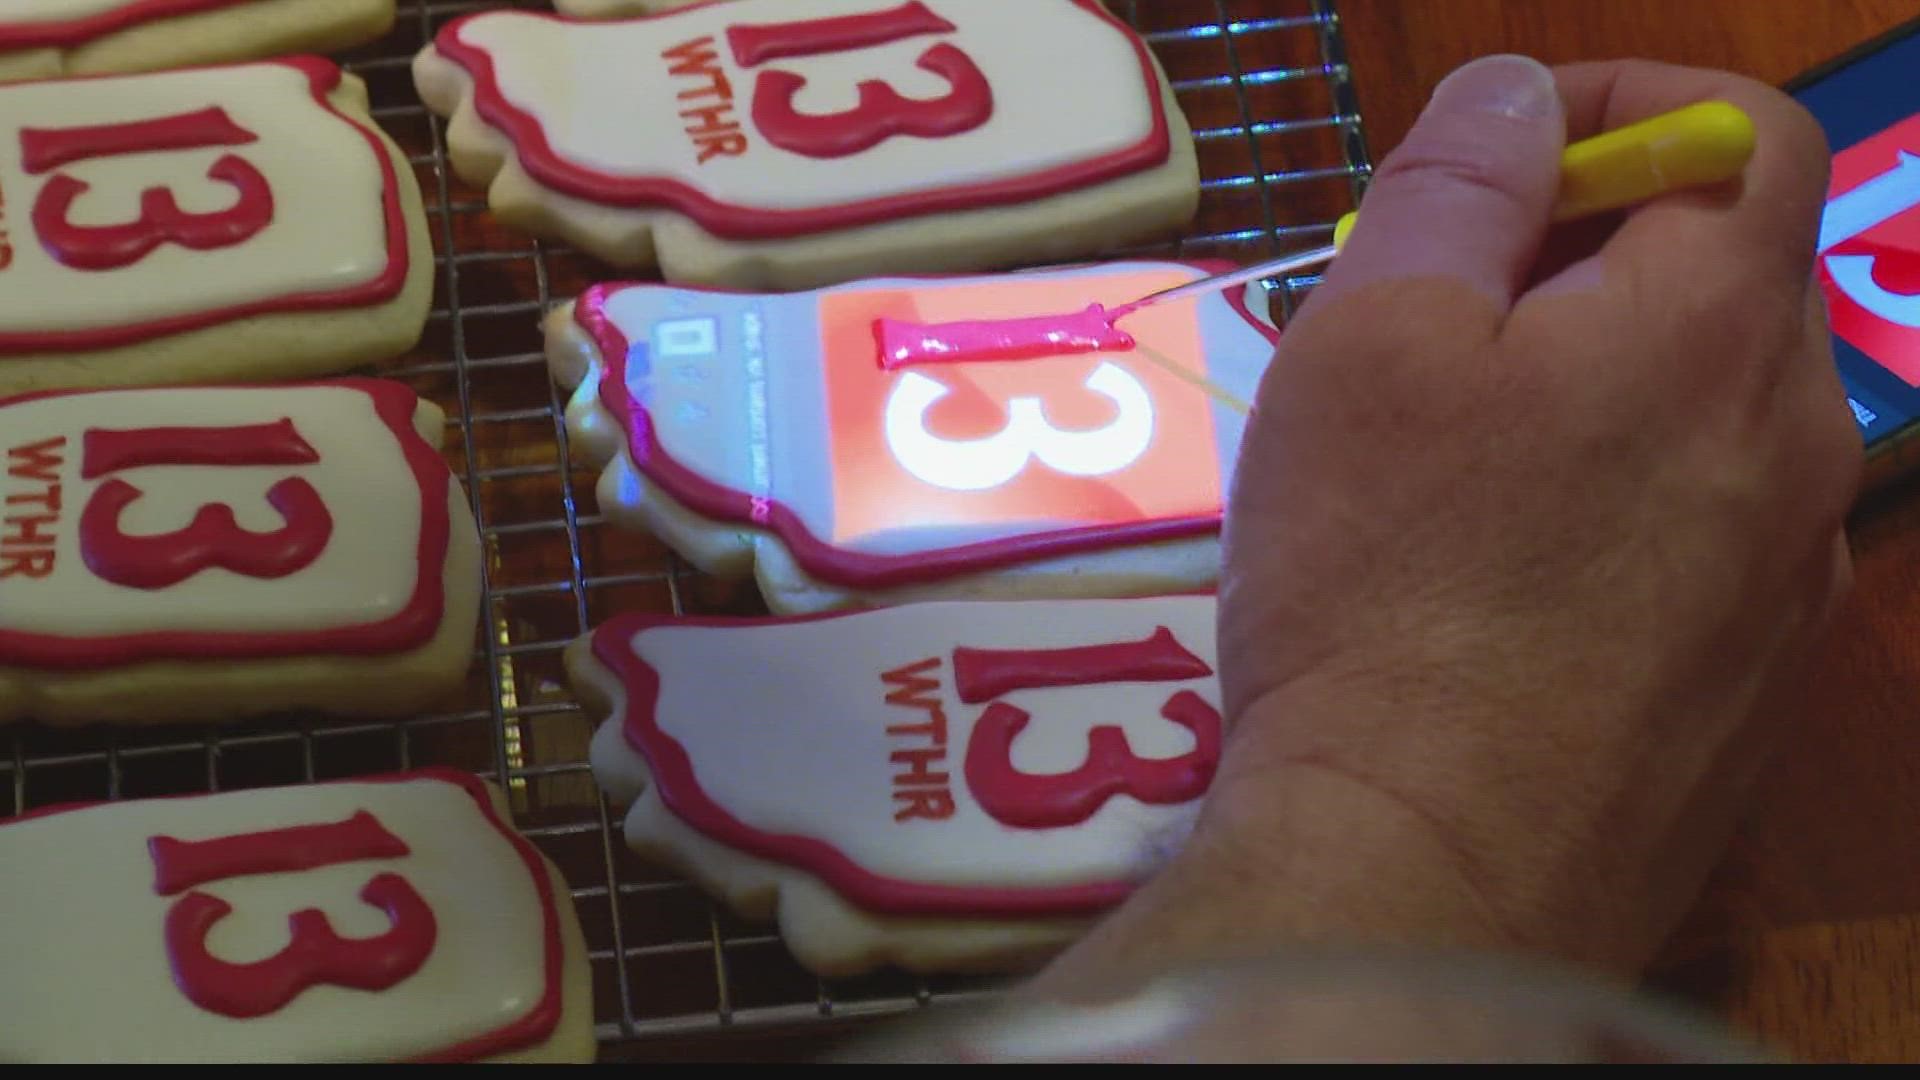 Kyle Beimfohr's cookies have become so popular that he’s now selling them under the name Kyle’s Sweet Tooth Creations.